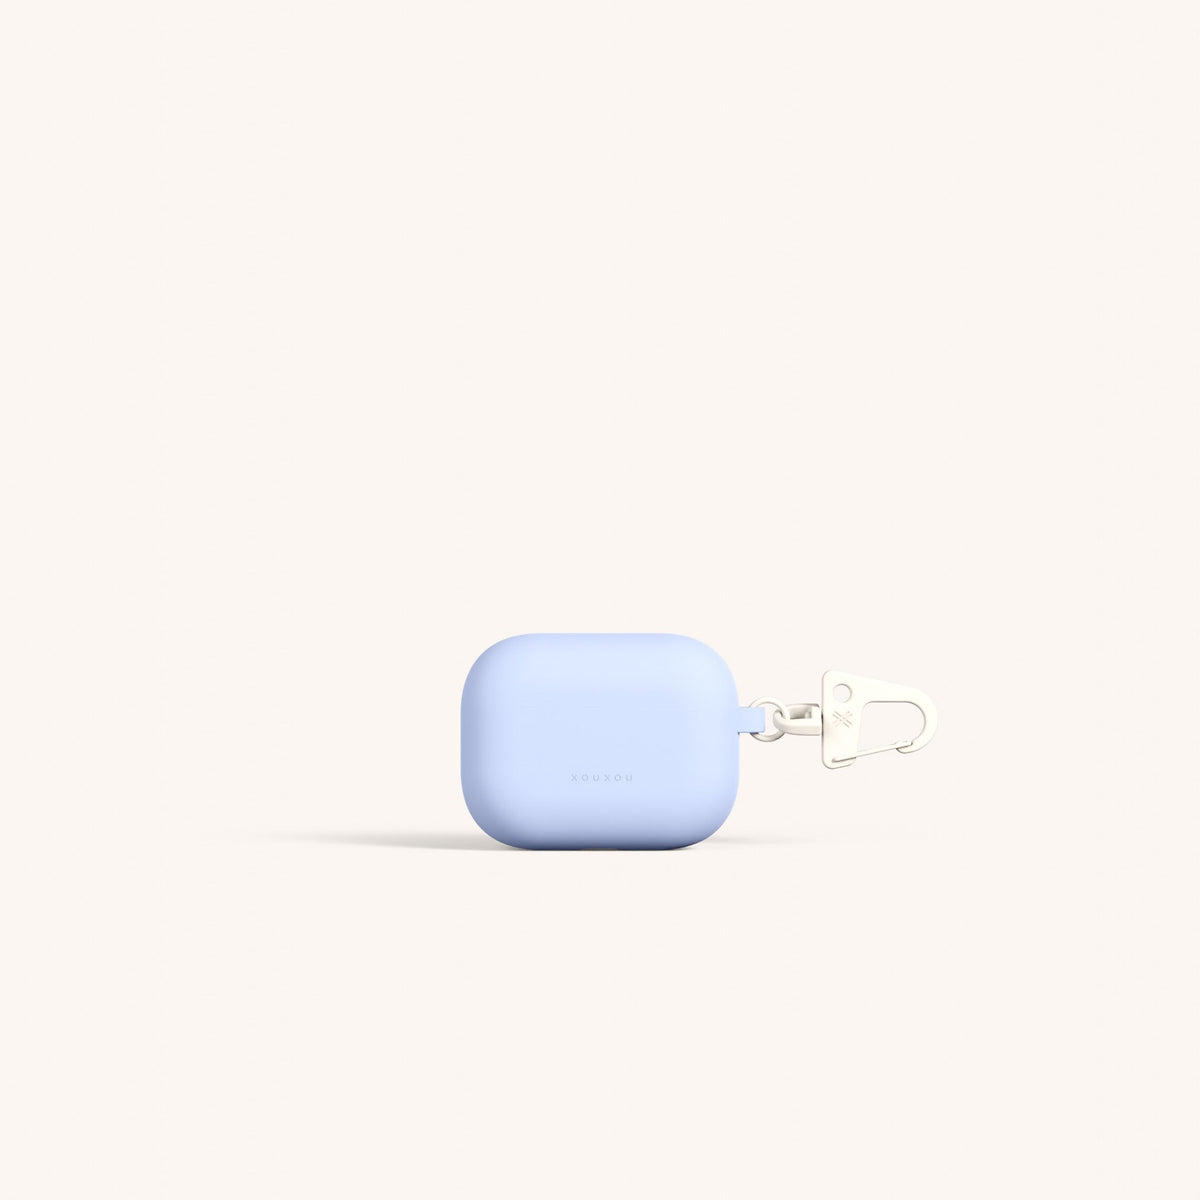 AirPods Case for AirPods Pro 1st Generation (2nd Generation compatible) in Baby Blue Total View | XOUXOU #airpods model_pro 1st gen (2nd gen comp.)